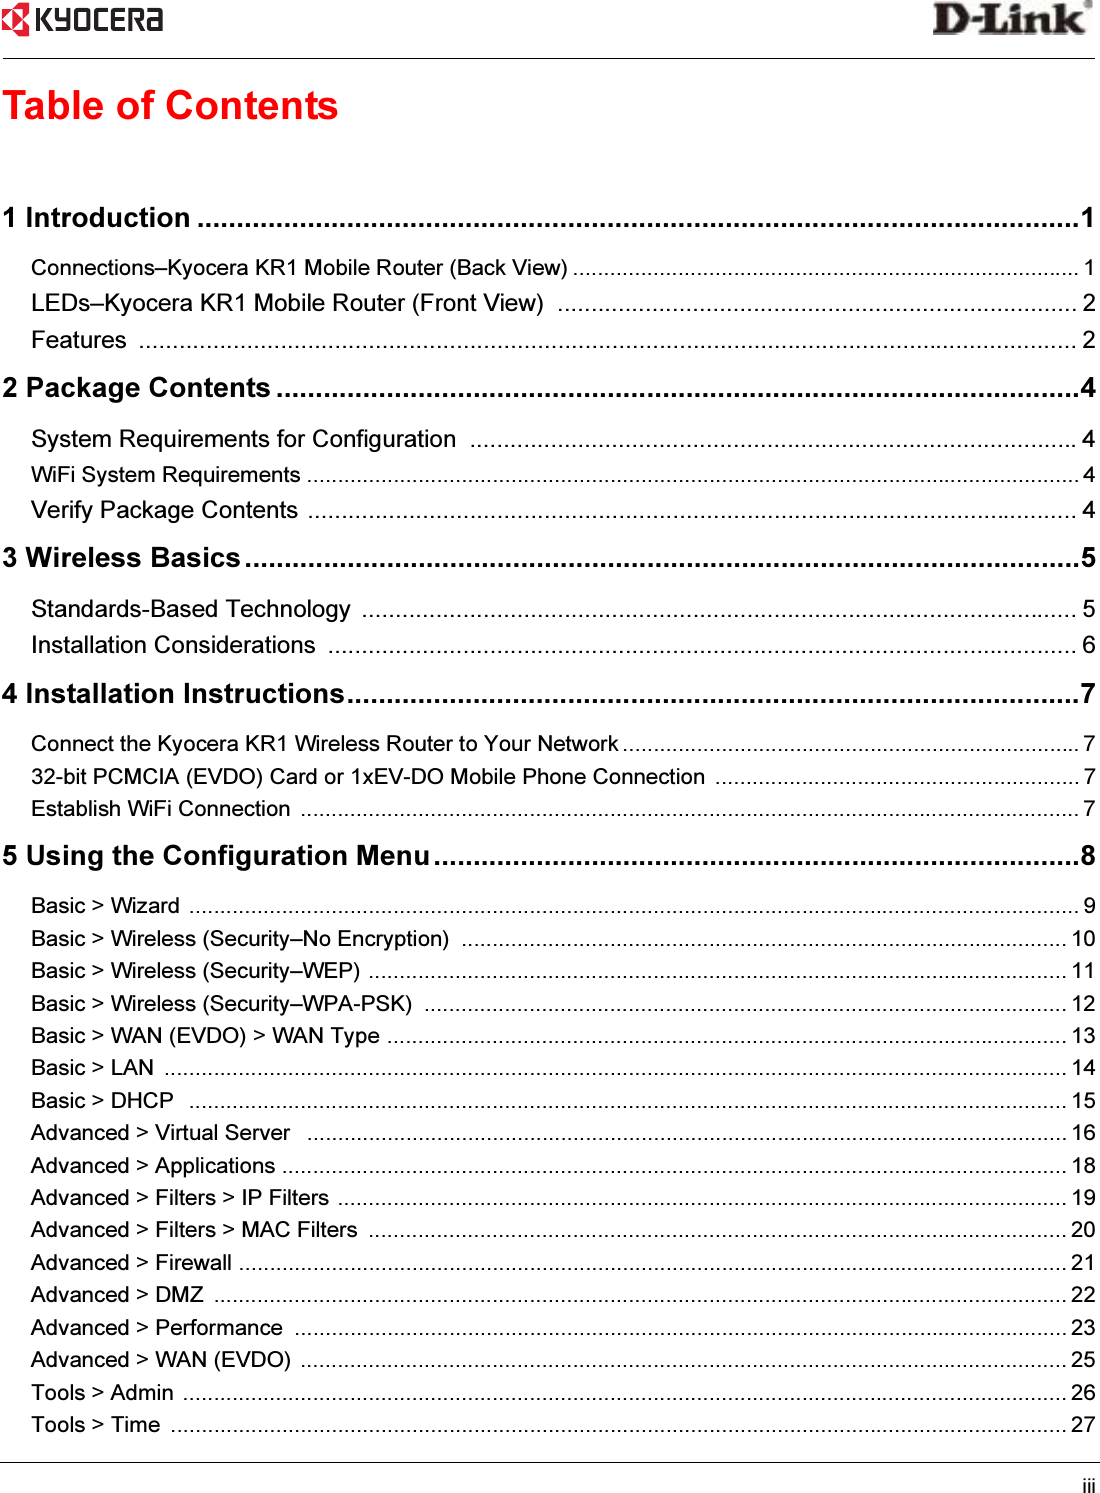 iii Table of Contents1 Introduction ................................................................................................................1Connections–Kyocera KR1 Mobile Router (Back View) .................................................................................. 1LEDs–Kyocera KR1 Mobile Router (Front View)  ............................................................................. 2Features ........................................................................................................................................... 22 Package Contents ......................................................................................................4System Requirements for Configuration  ..........................................................................................4WiFi System Requirements ............................................................................................................................. 4Verify Package Contents .................................................................................................................. 43 Wireless Basics ..........................................................................................................5Standards-Based Technology  .......................................................................................................... 5Installation Considerations  ............................................................................................................... 64 Installation Instructions.............................................................................................7Connect the Kyocera KR1 Wireless Router to Your Network .......................................................................... 732-bit PCMCIA (EVDO) Card or 1xEV-DO Mobile Phone Connection  ........................................................... 7Establish WiFi Connection  .............................................................................................................................. 75 Using the Configuration Menu ..................................................................................8Basic &gt; Wizard  ................................................................................................................................................ 9Basic &gt; Wireless (Security–No Encryption)  .................................................................................................. 10Basic &gt; Wireless (Security–WEP) ................................................................................................................. 11Basic &gt; Wireless (Security–WPA-PSK)  ........................................................................................................ 12Basic &gt; WAN (EVDO) &gt; WAN Type .............................................................................................................. 13Basic &gt; LAN  .................................................................................................................................................. 14Basic &gt; DHCP   .............................................................................................................................................. 15Advanced &gt; Virtual Server   ........................................................................................................................... 16Advanced &gt; Applications ............................................................................................................................... 18Advanced &gt; Filters &gt; IP Filters ...................................................................................................................... 19Advanced &gt; Filters &gt; MAC Filters  ................................................................................................................. 20Advanced &gt; Firewall ...................................................................................................................................... 21Advanced &gt; DMZ  .......................................................................................................................................... 22Advanced &gt; Performance  ............................................................................................................................. 23Advanced &gt; WAN (EVDO) ............................................................................................................................ 25Tools &gt; Admin  ............................................................................................................................................... 26Tools &gt; Time  ................................................................................................................................................. 27